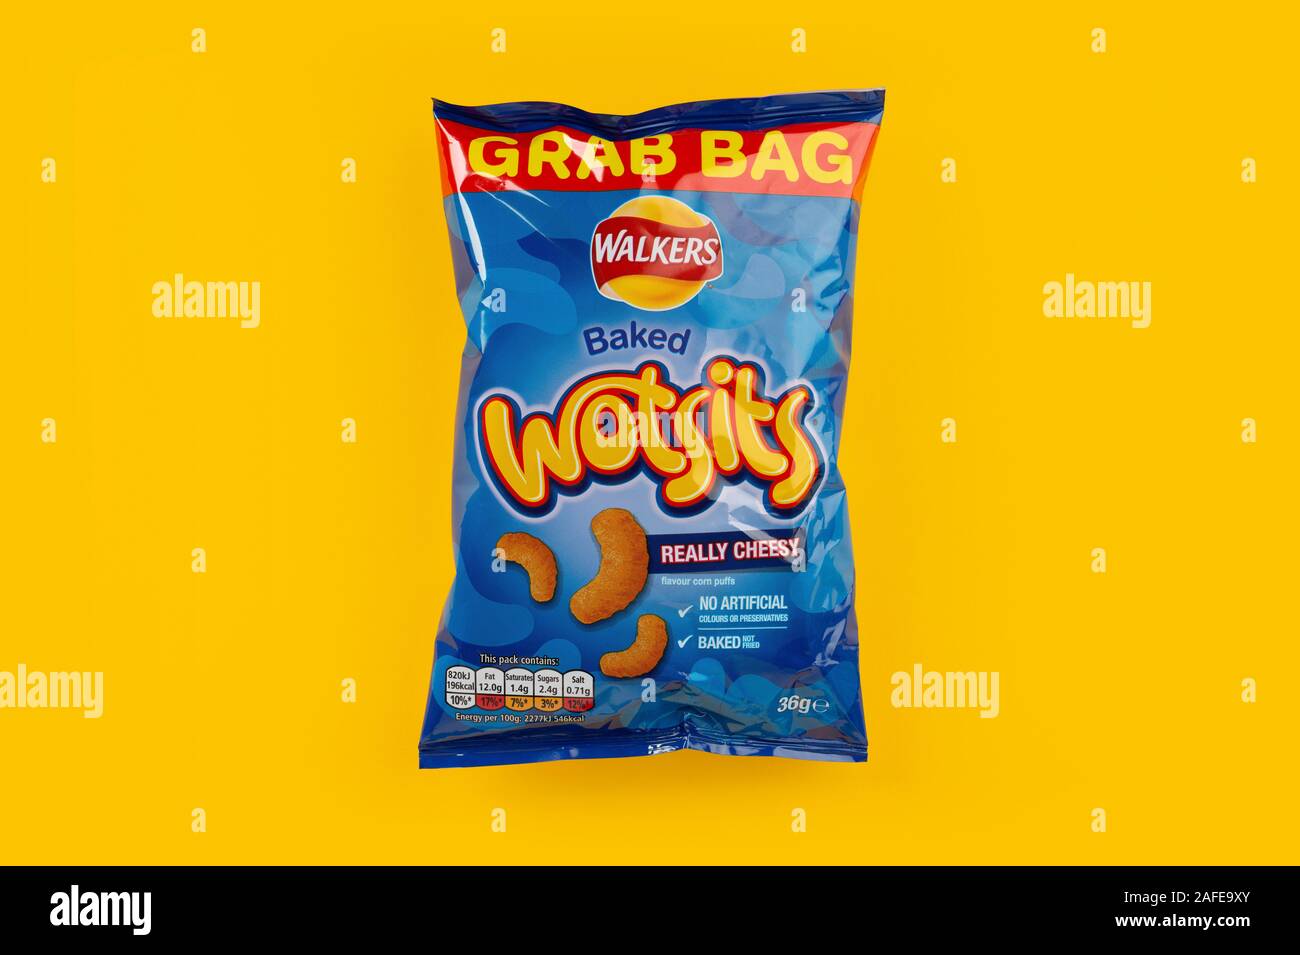 A grab bag packet of Walkers Wotsits crisps shot on a yellow background. Stock Photo